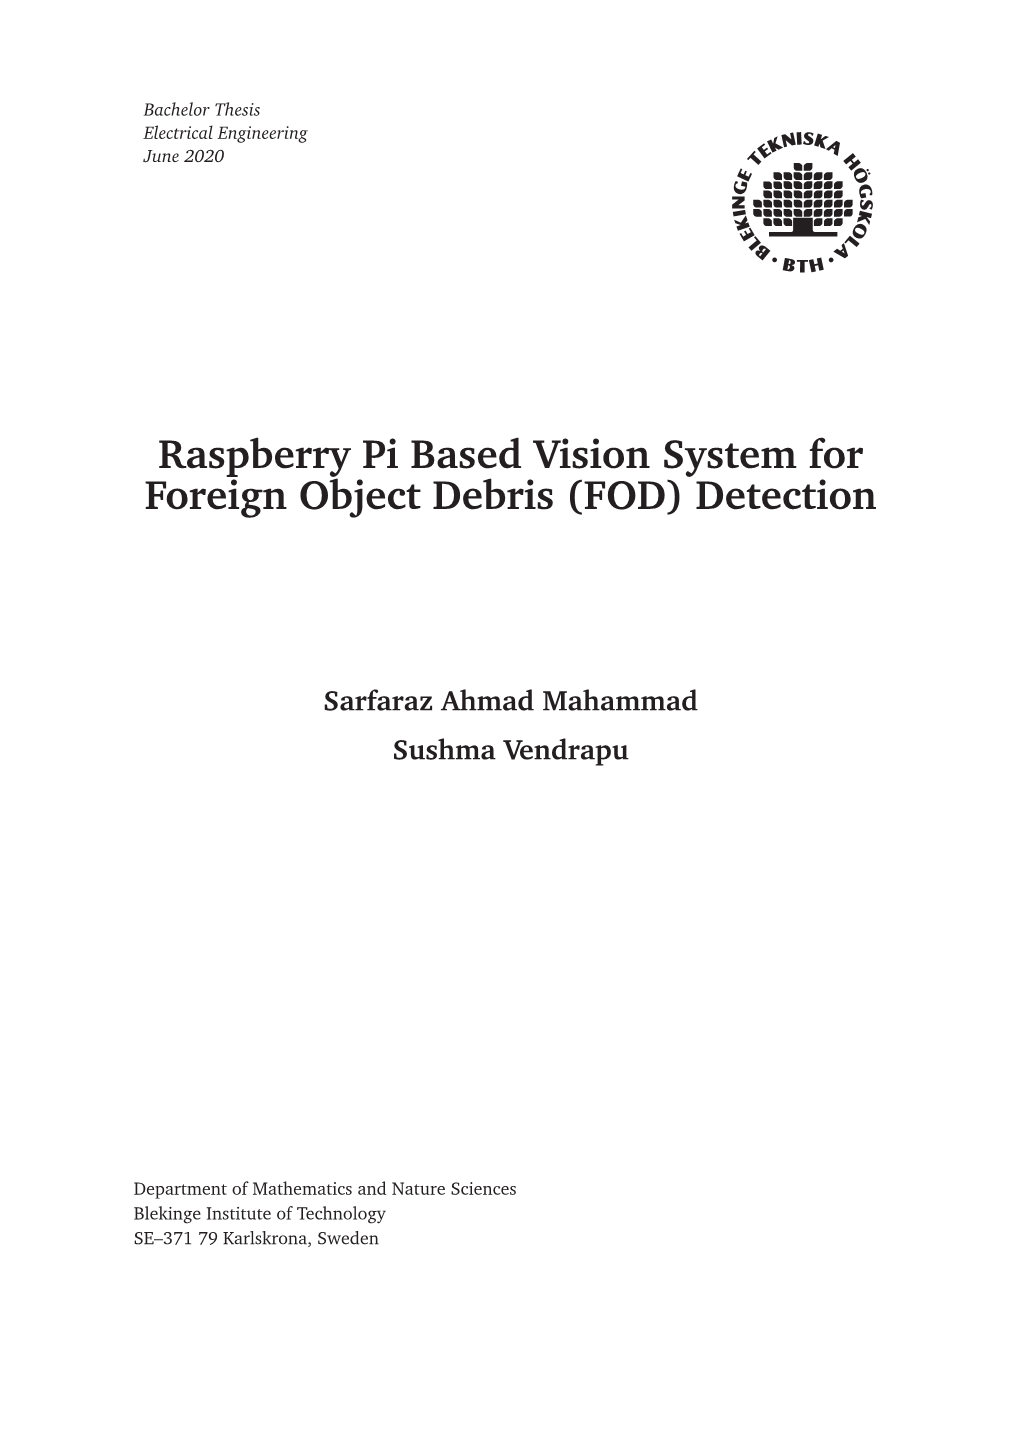 Raspberry Pi Based Vision System for Foreign Object Debris (FOD) Detection